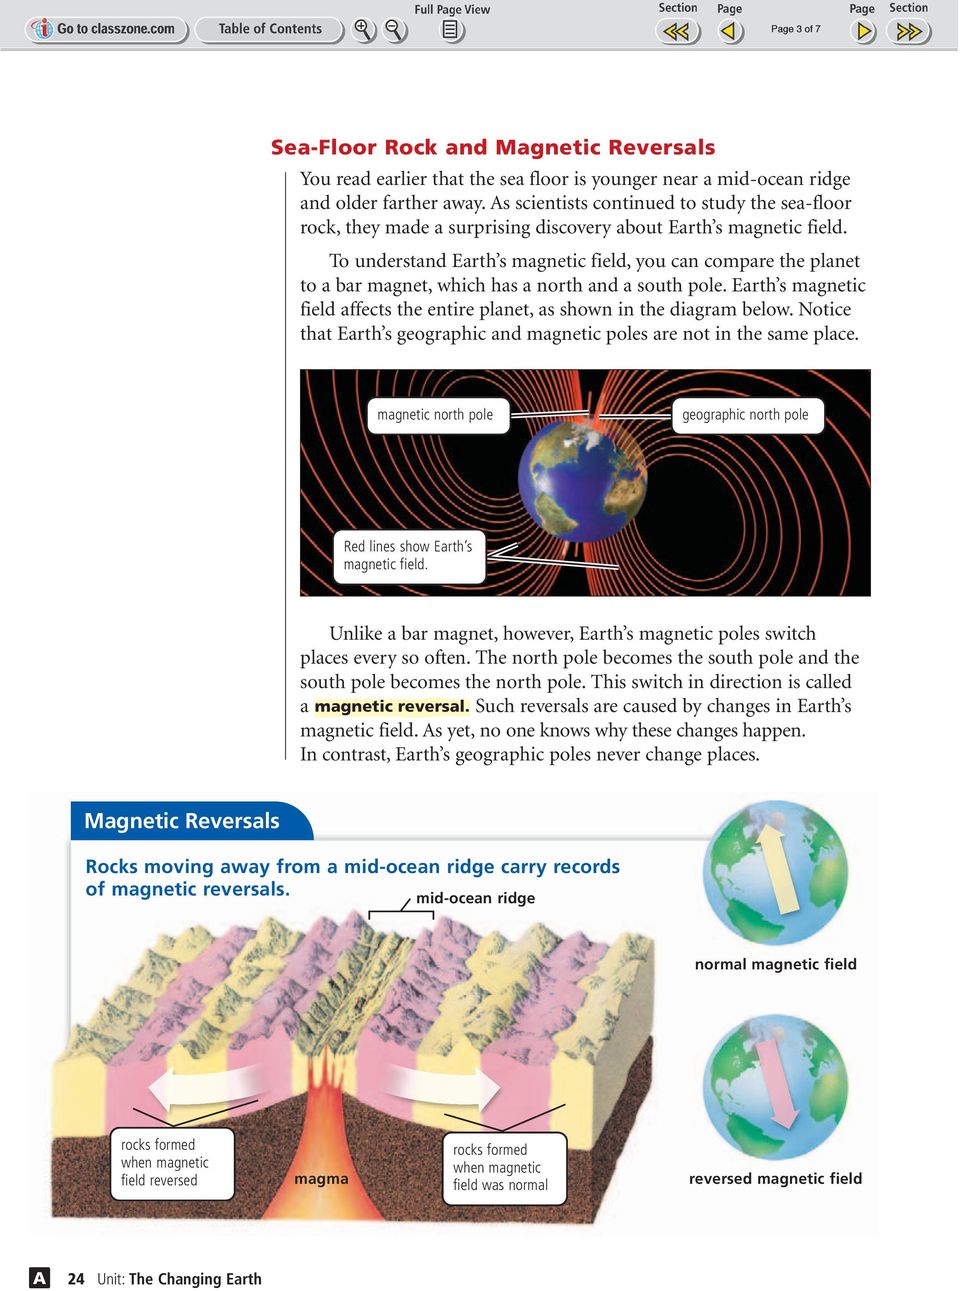 To understand Earth s magnetic field, you can compare the planet to a bar magnet, which has a north and a south pole. Earth s magnetic field affects the entire planet, as shown in the diagram below.